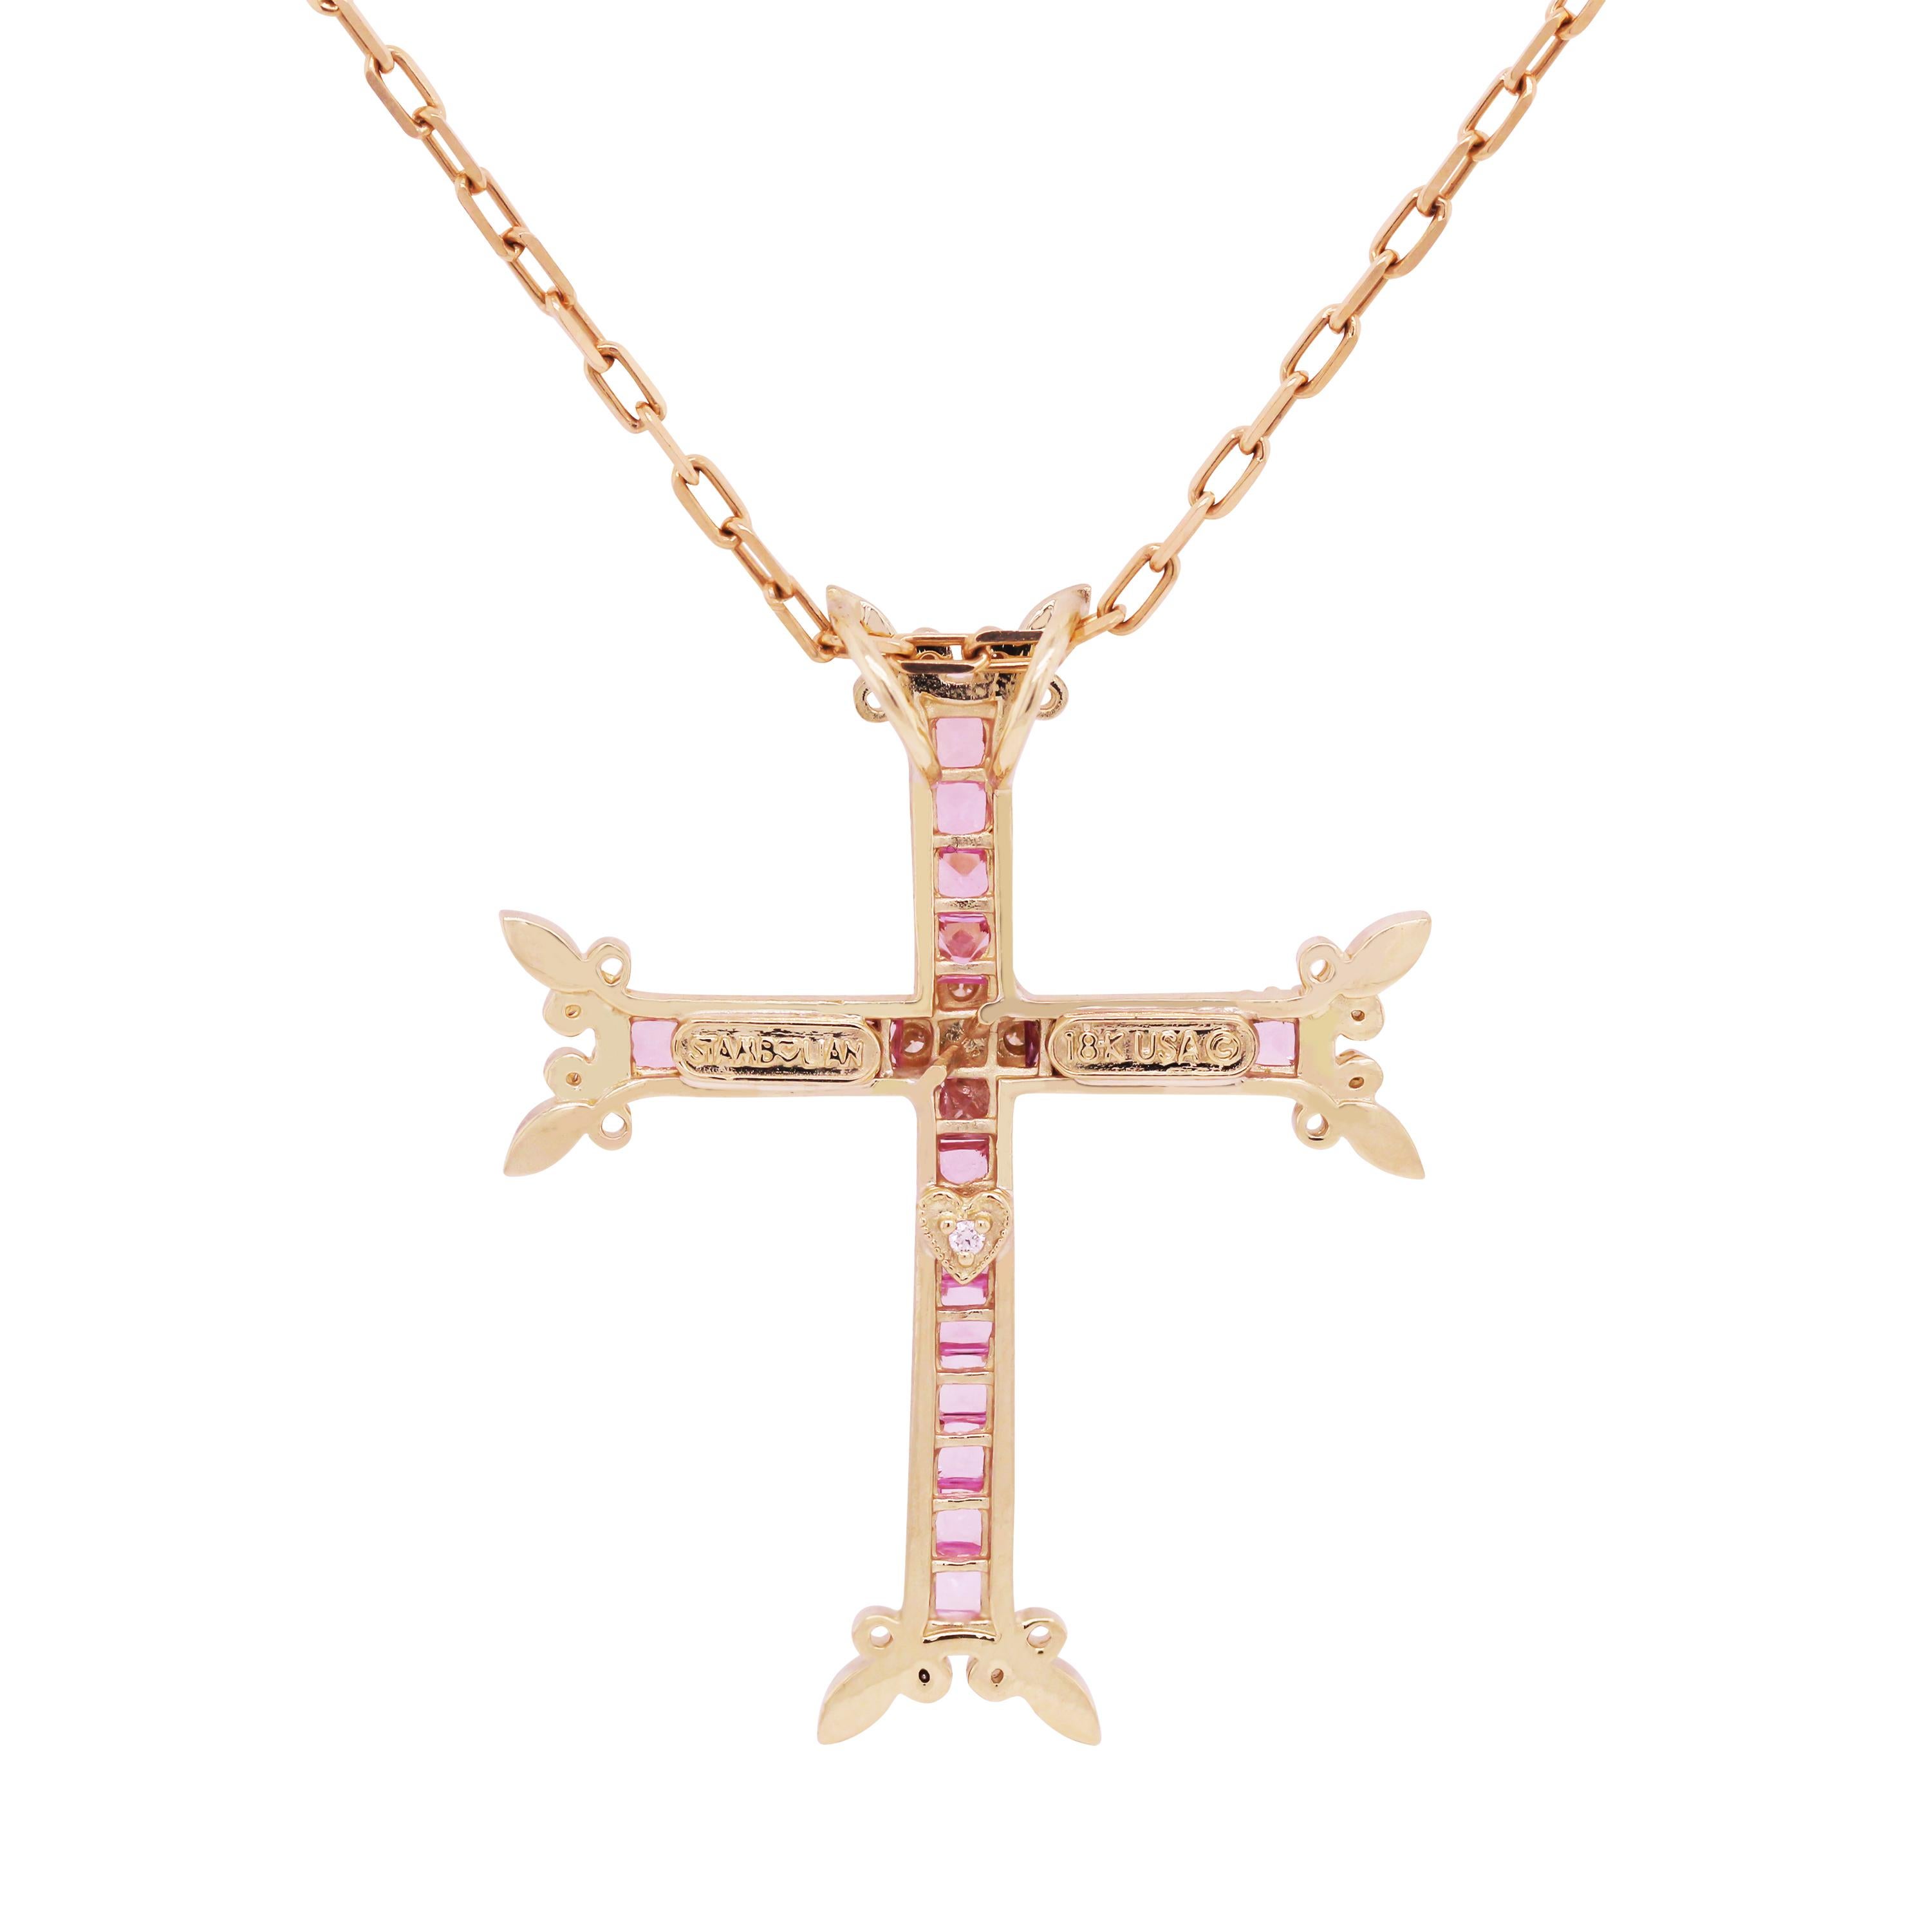 Stambolian 18K Gold Diamond Princess Cut Pink Sapphires Cross Pendant Necklace

This unique take on a cross is inspired by the Armenian cross

2.50 carat Pink sapphires total weight. Sapphires are all princess cut.

Diamonds are set in the center of